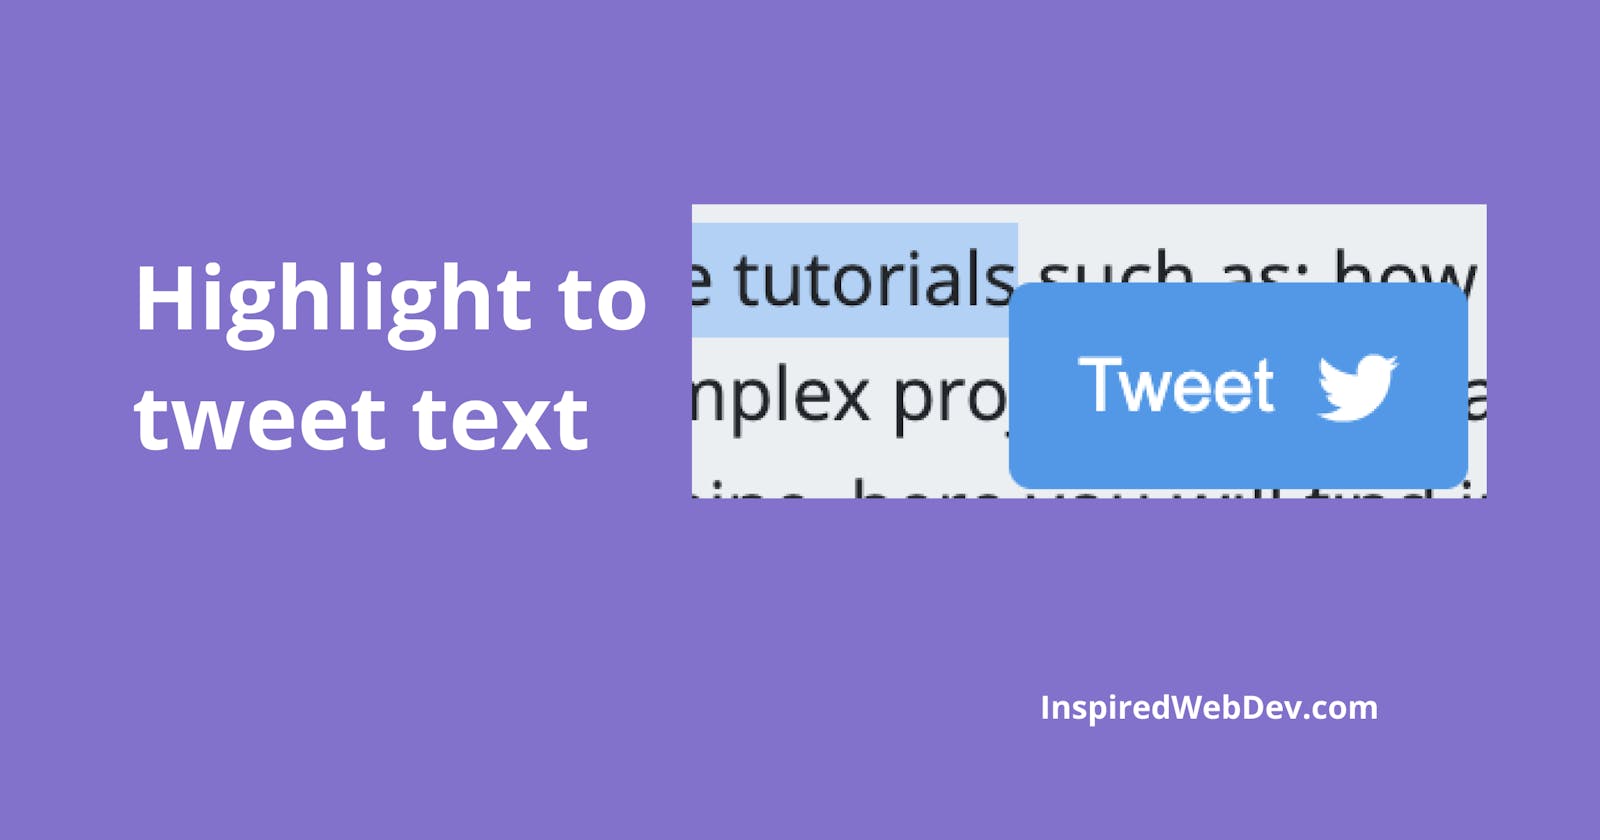 Create a JavaScript plugin to highlight and tweet text